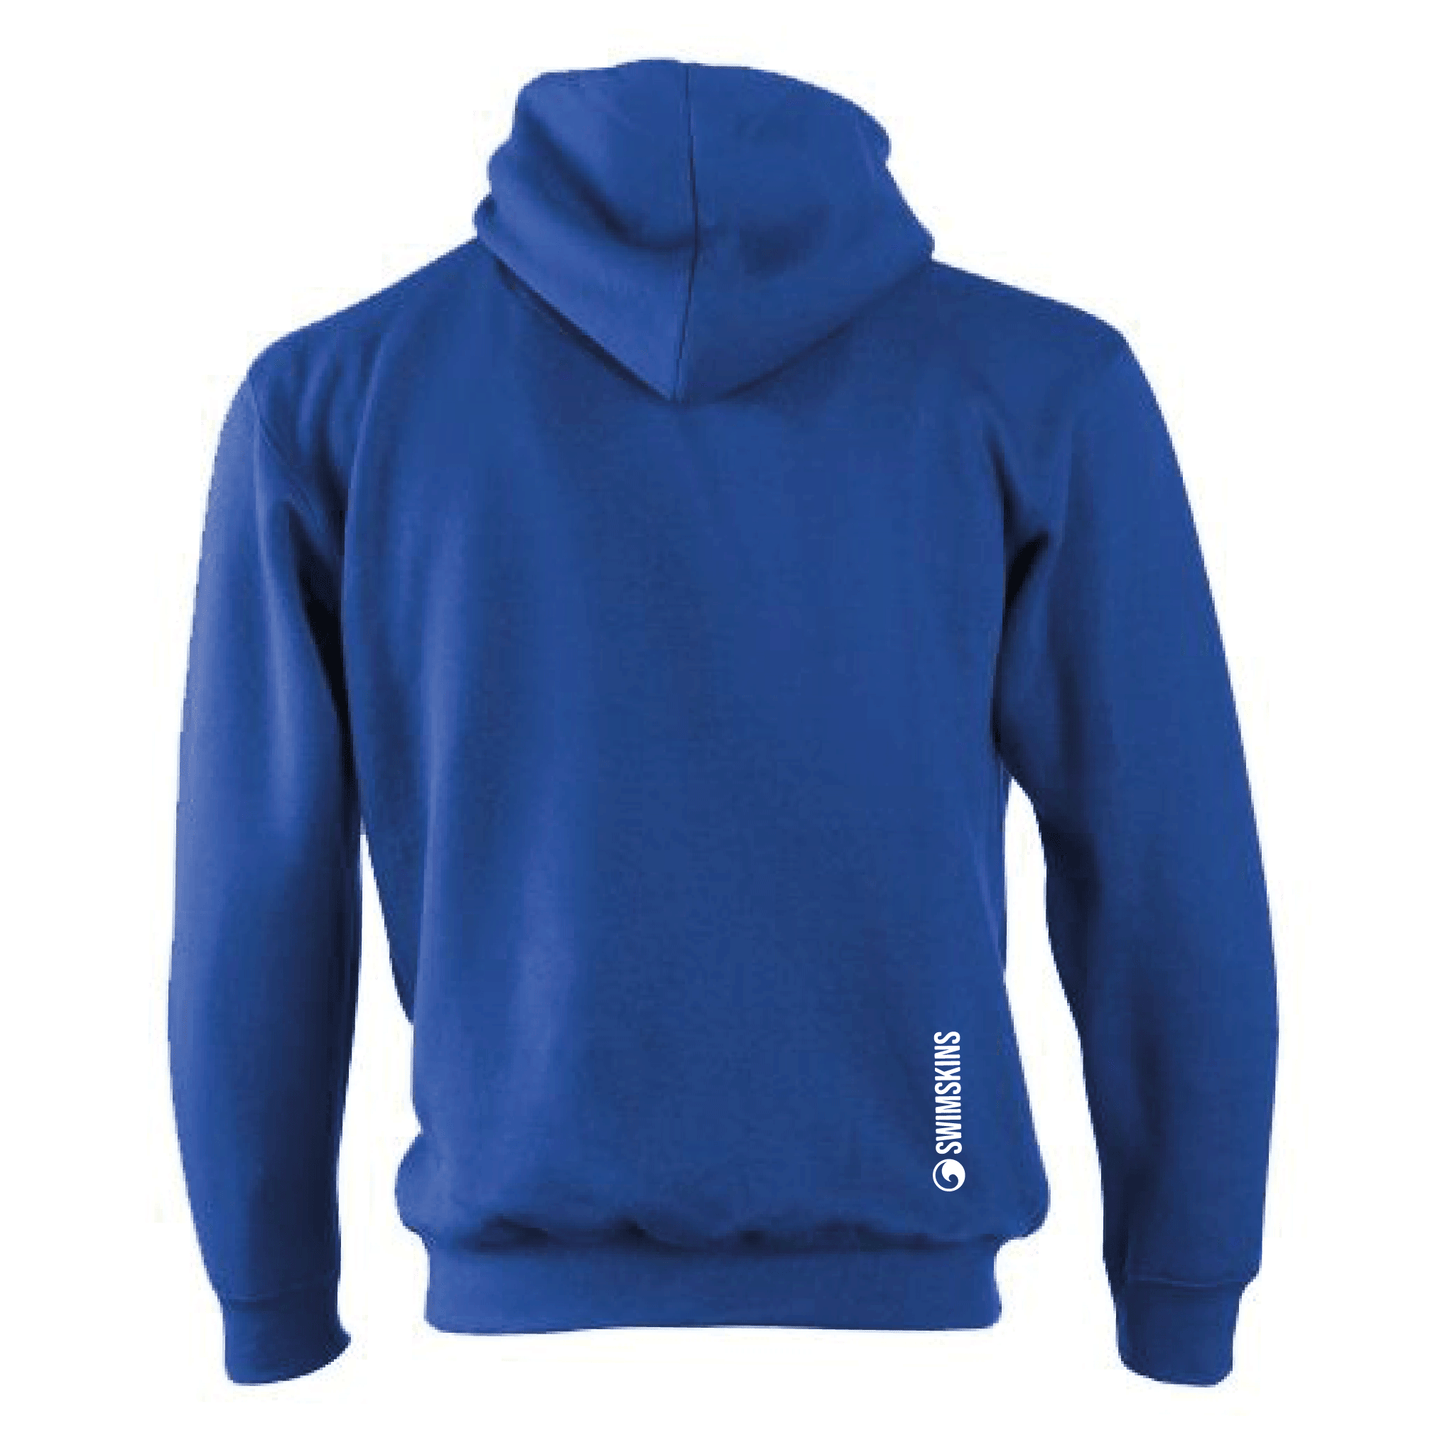 In The Middle Hoody - Royal - BSC